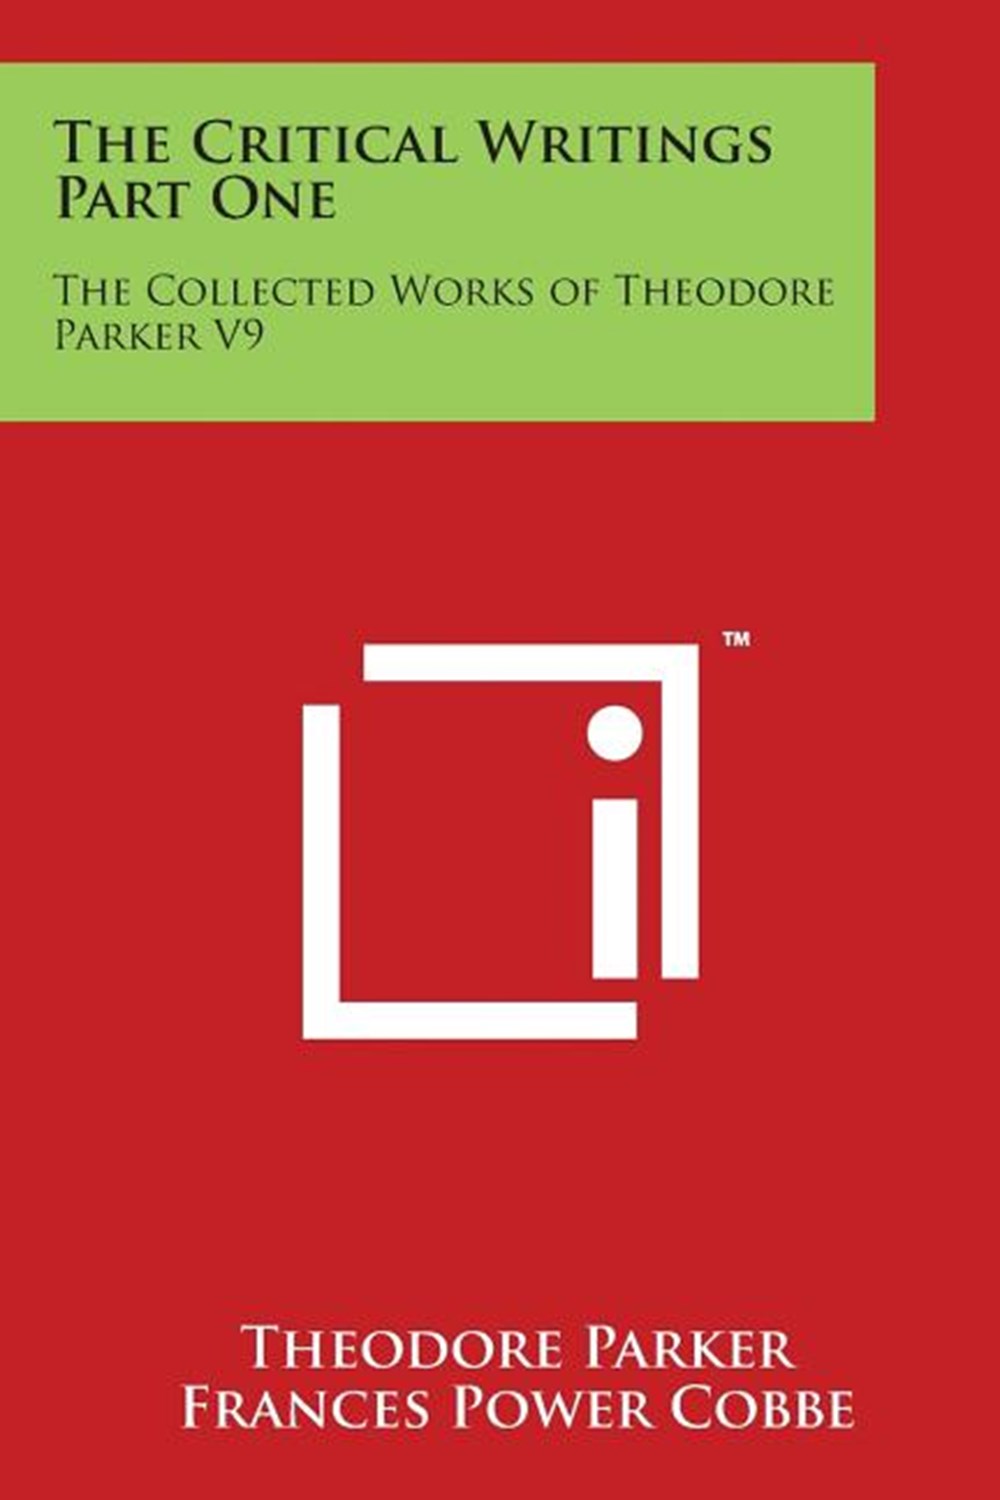 Critical Writings Part One: The Collected Works of Theodore Parker V9